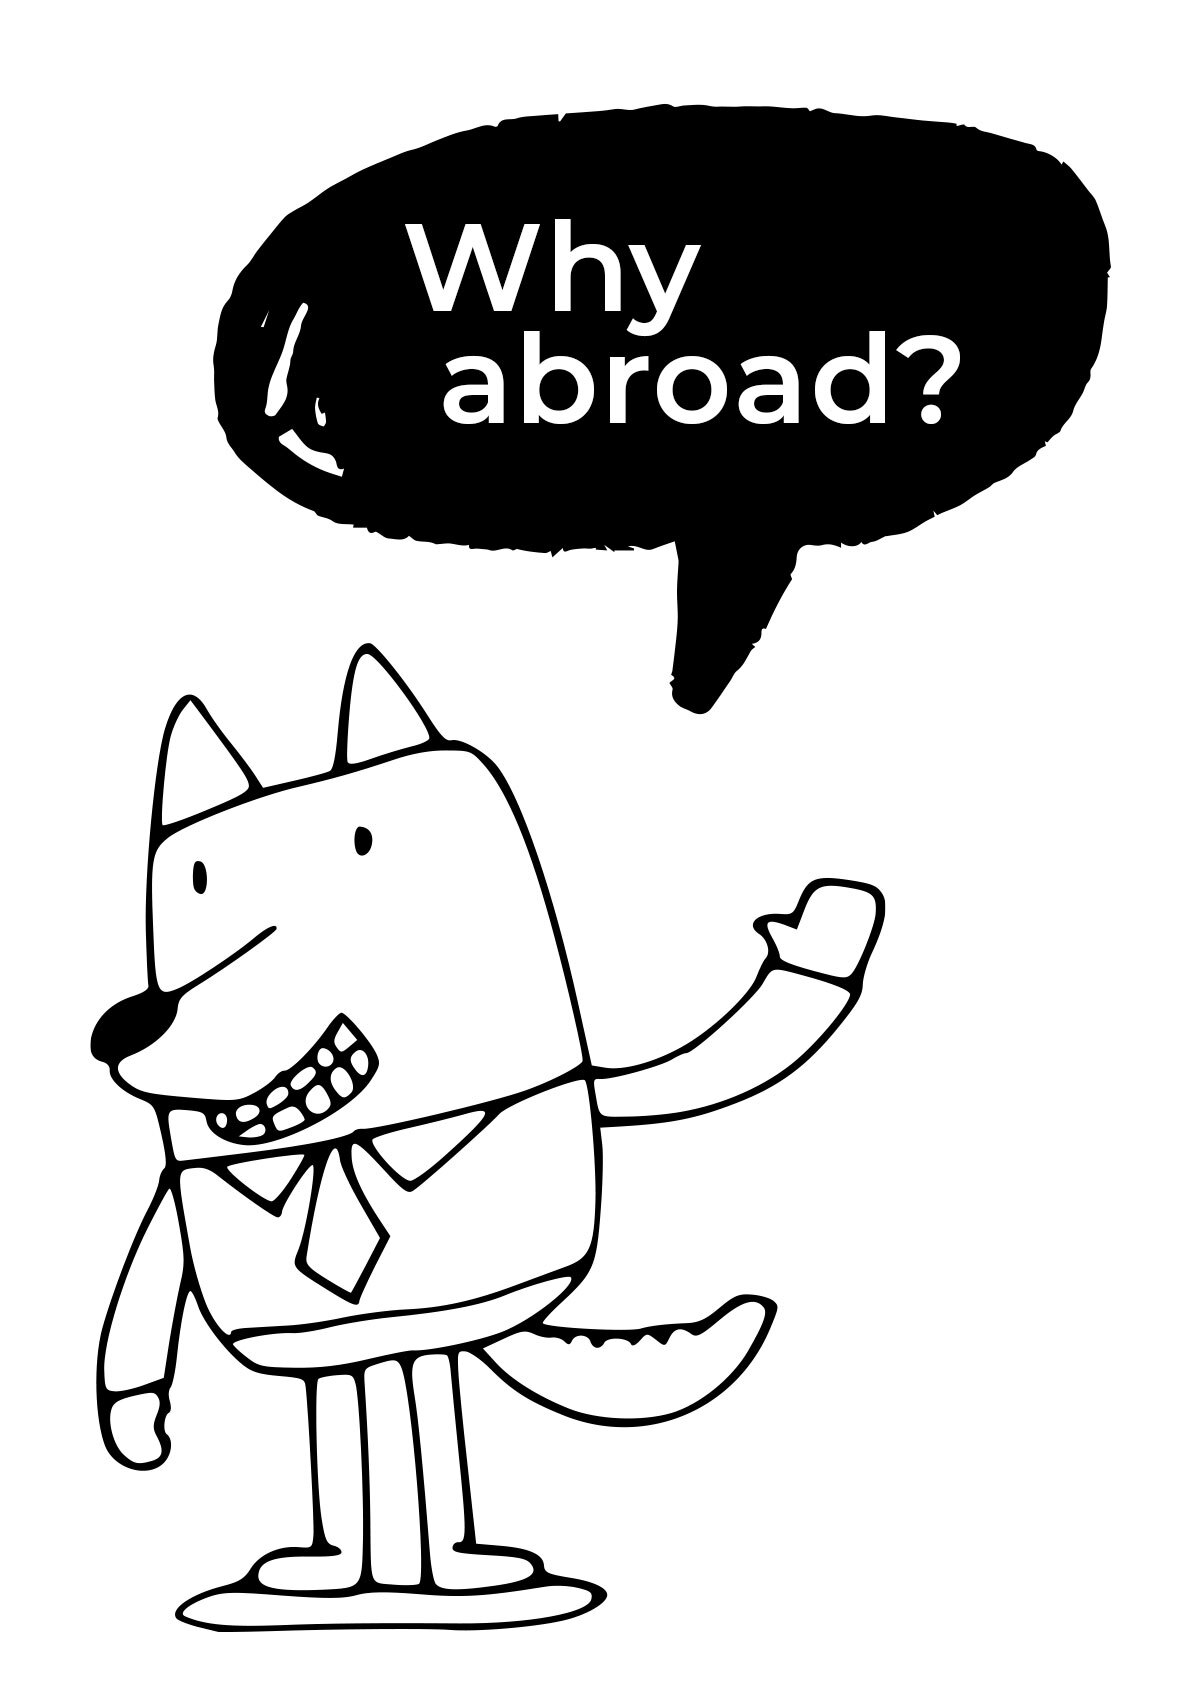 Why abroad?